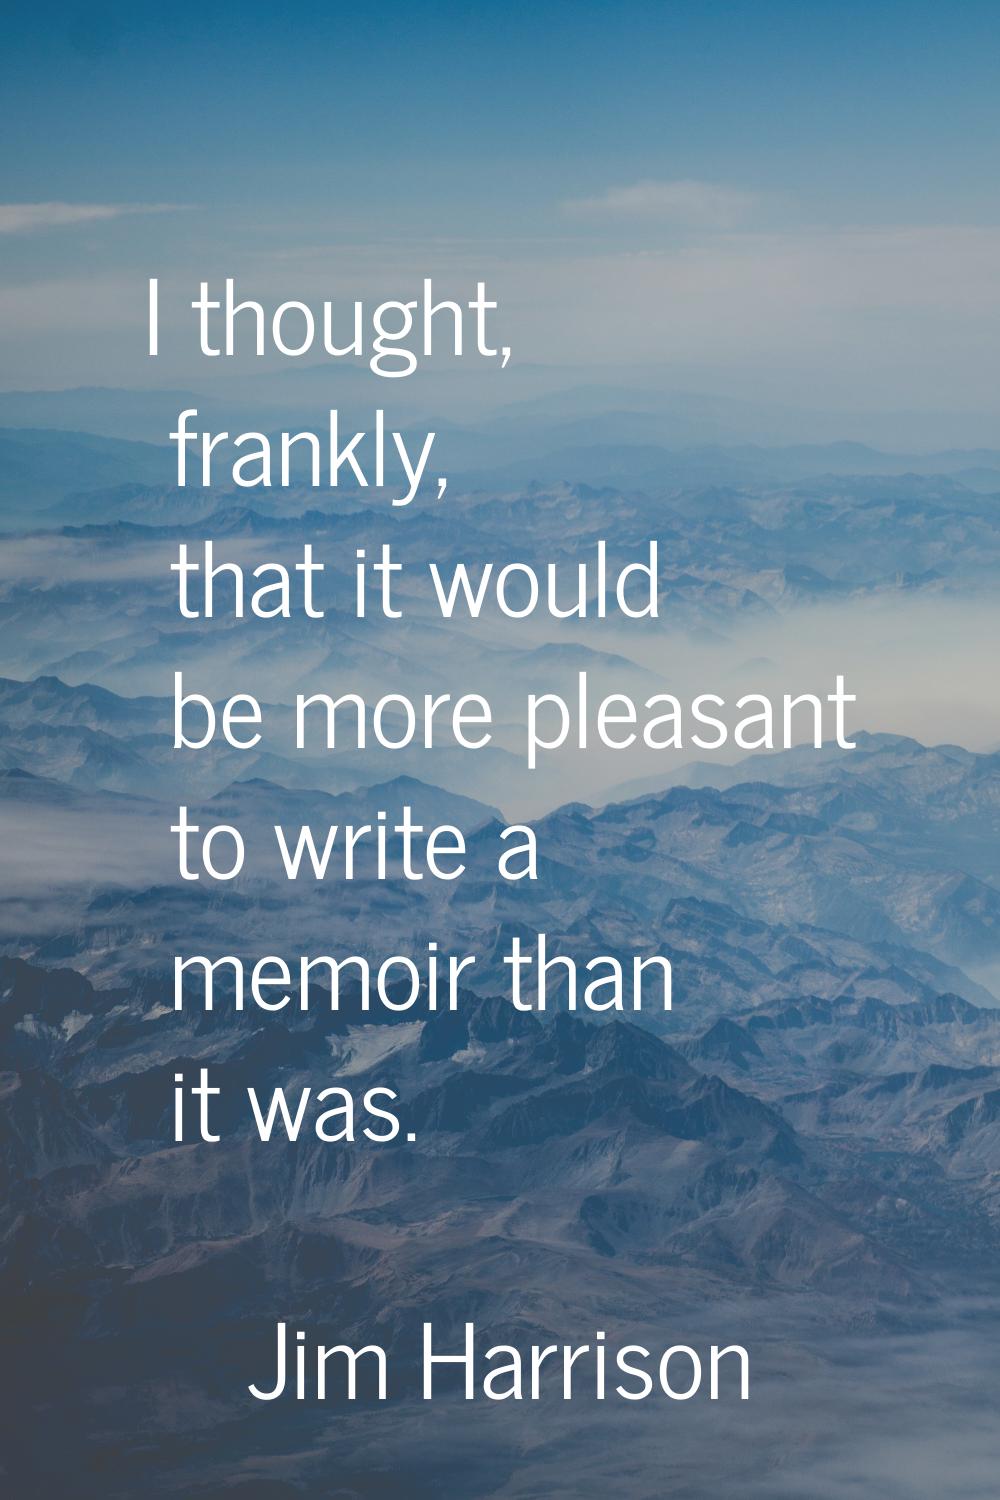 I thought, frankly, that it would be more pleasant to write a memoir than it was.